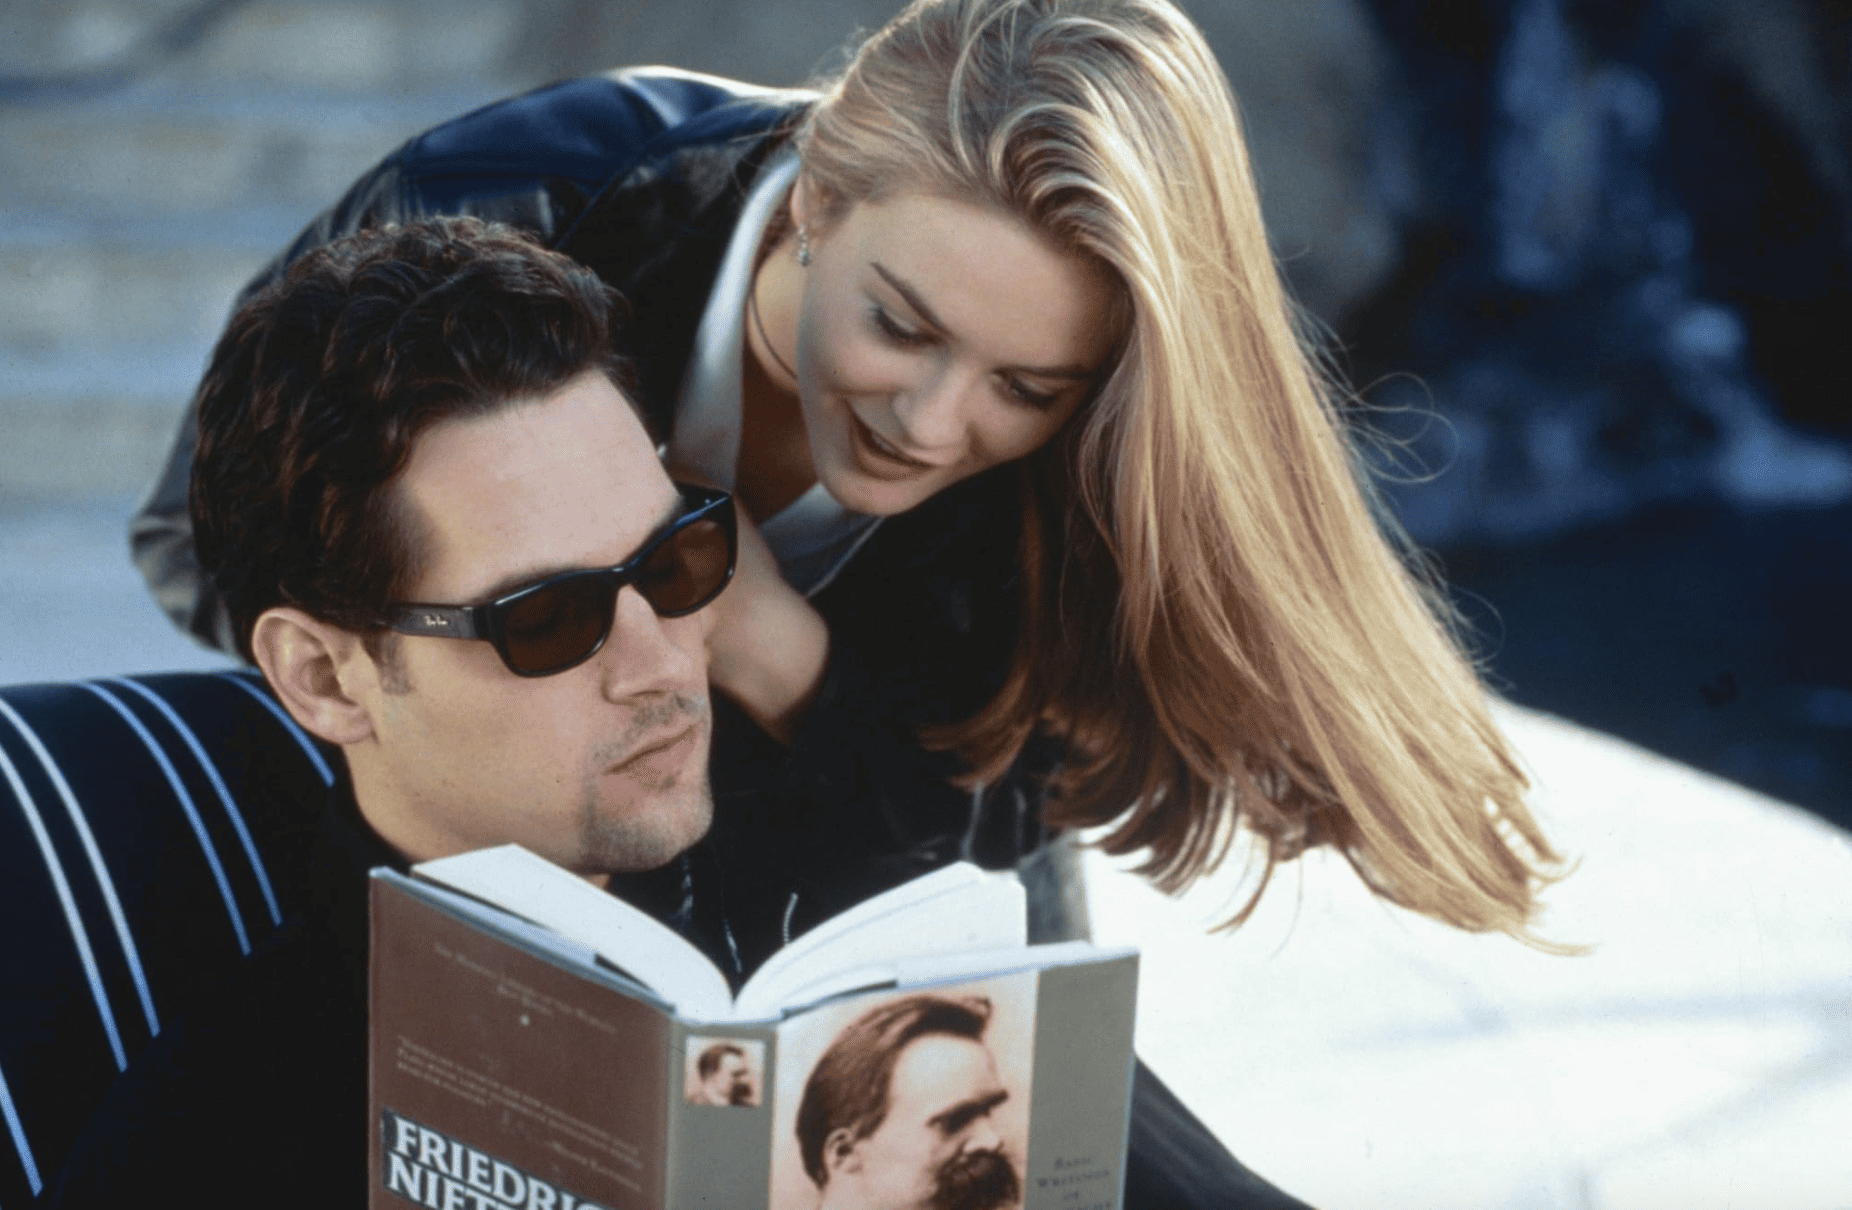 A girl teases her stepbrother while he reads in this image from Paramount Pictures.